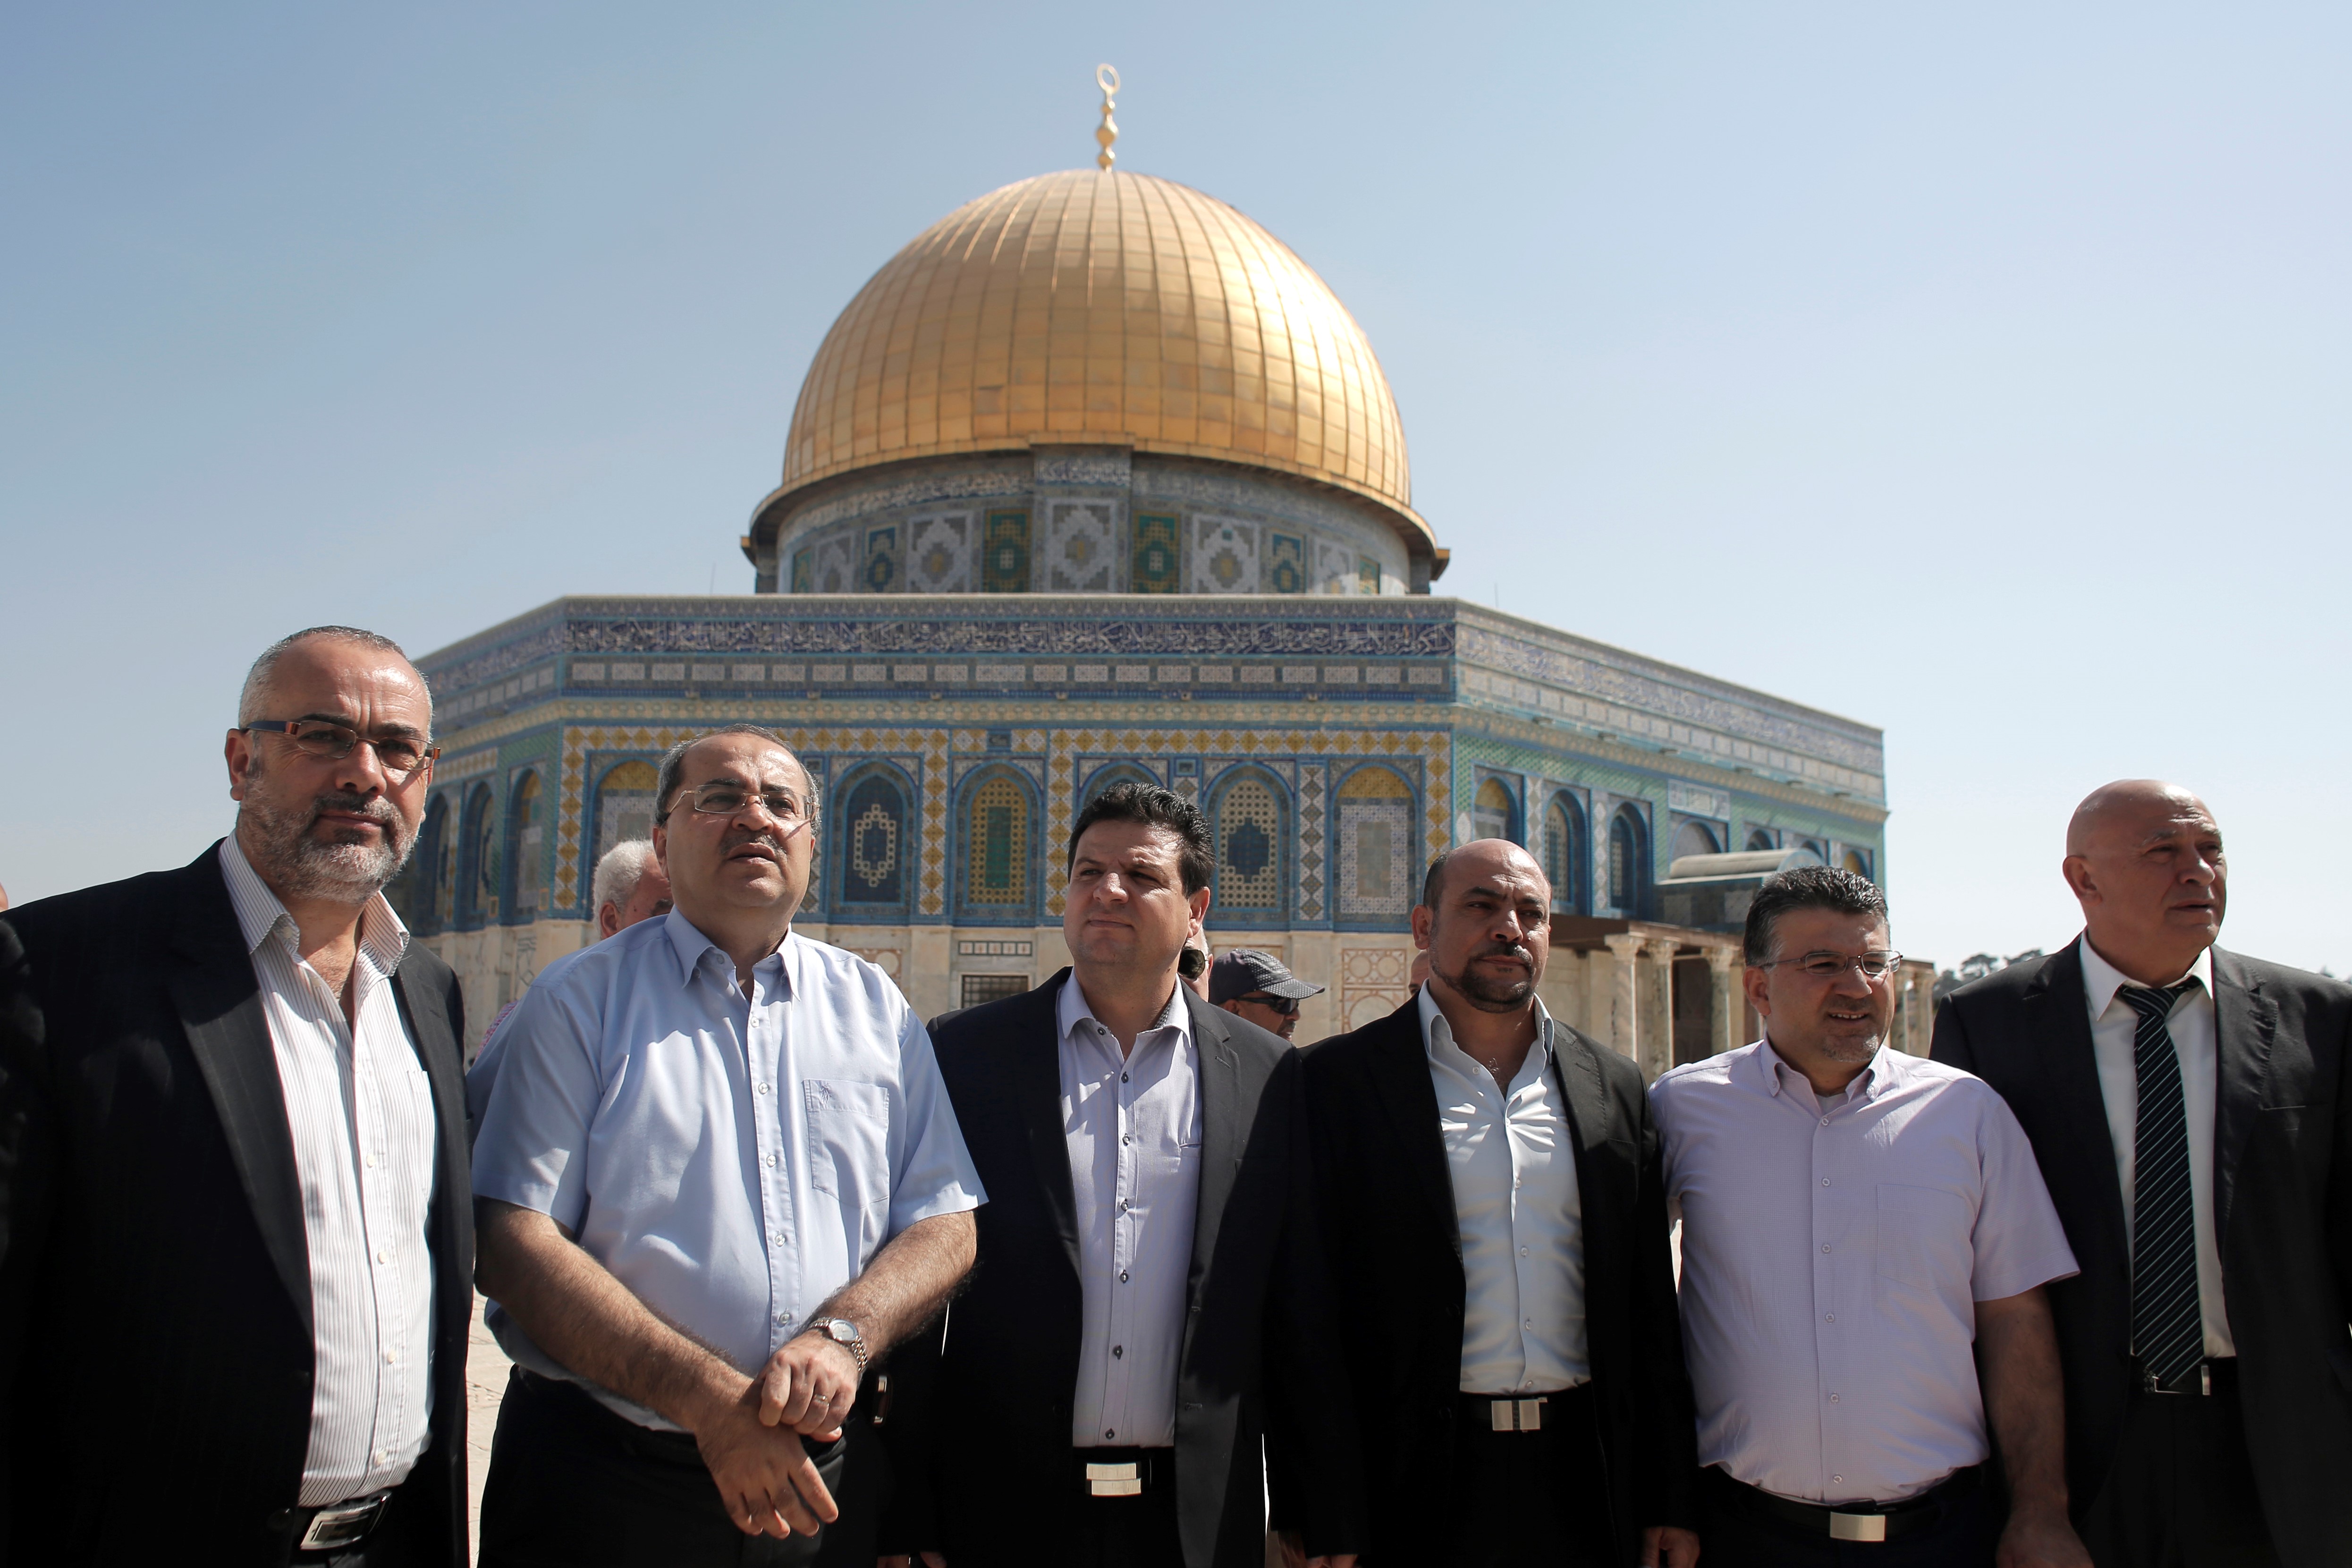 Members of the Joint List of Arab parties pose for a photo in front of the Dome of the Rock at the Al-Aqsa Mosque compound on 28 July, 2015 (AFP)